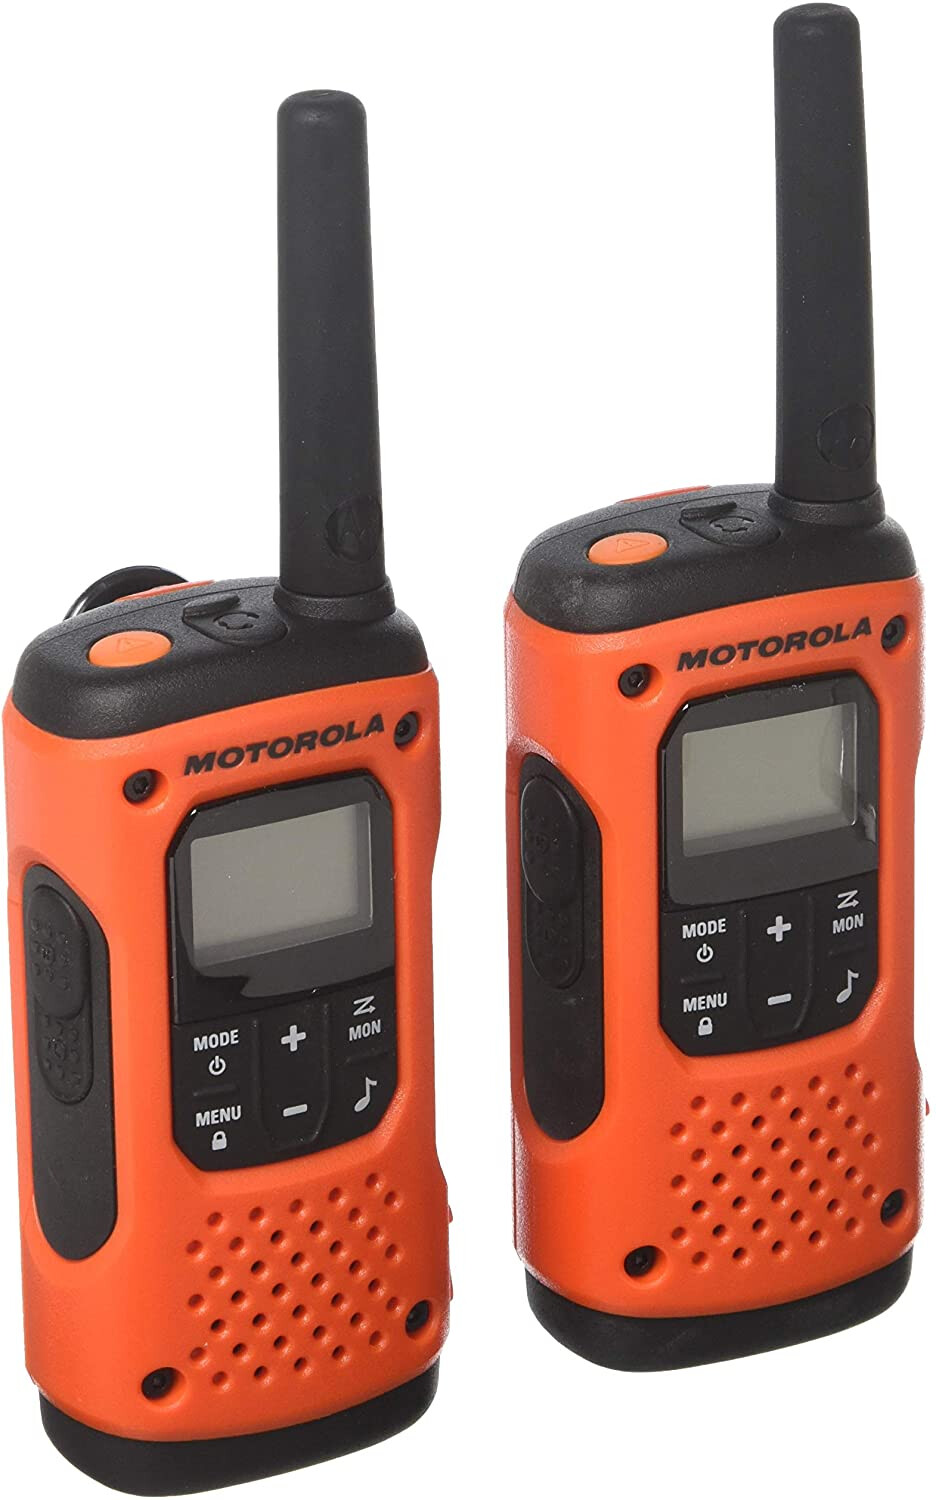 floating radio Buy floating radio at Best Price in Malaysia 